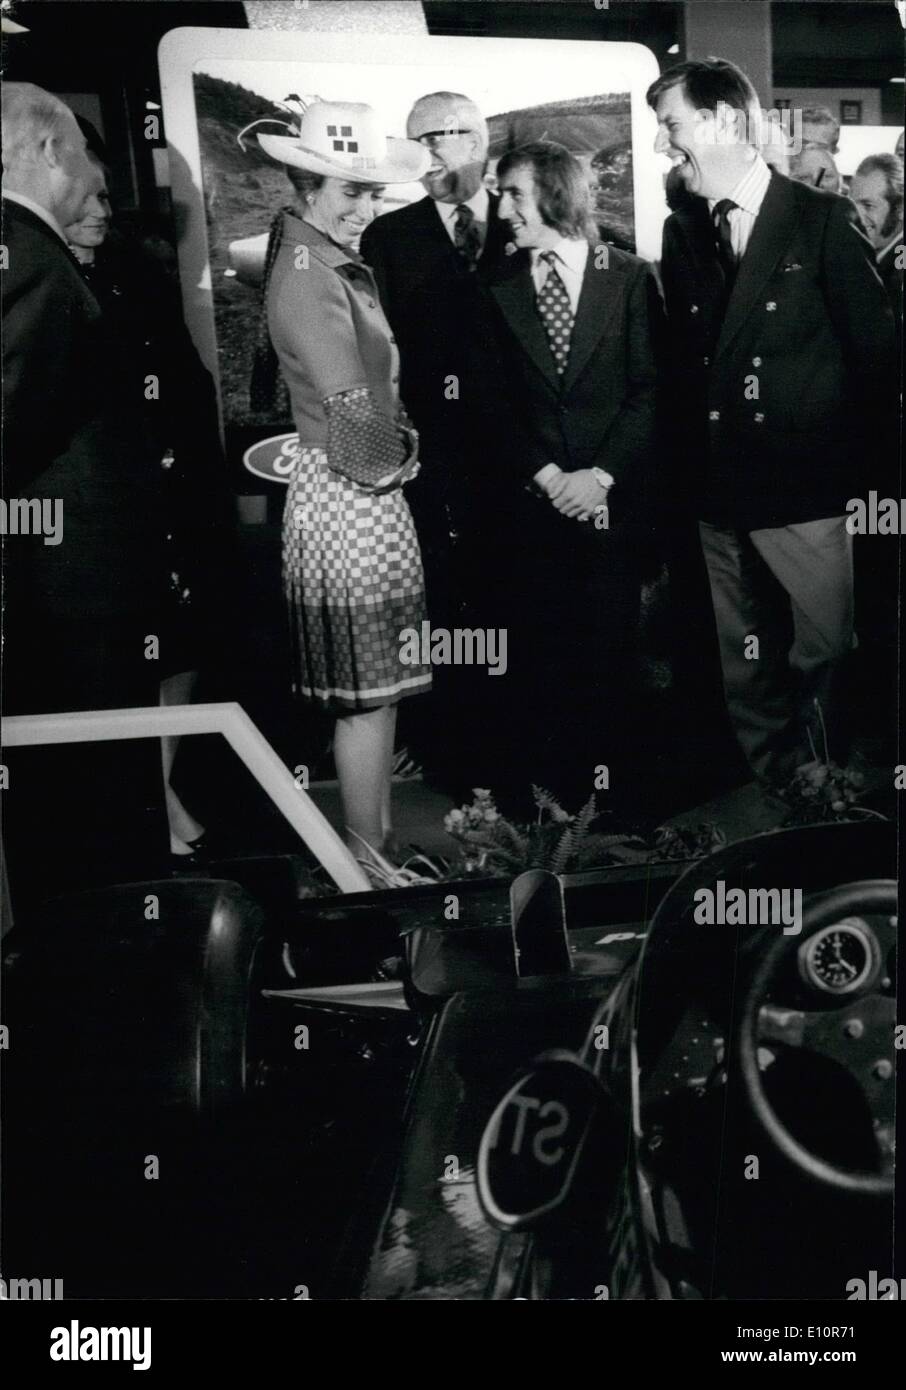 Oct. 10, 1973 - Princess Anne opens the Motor Show.: Princess Anne today opened the London International Motor Show at Earls Court. Photo shows Princess Anne shares a joke with Jackie Stewart, who recently announced his retirement from motor racing, in front of his Ford Tyrrell racing car - at the Show today. Stock Photo